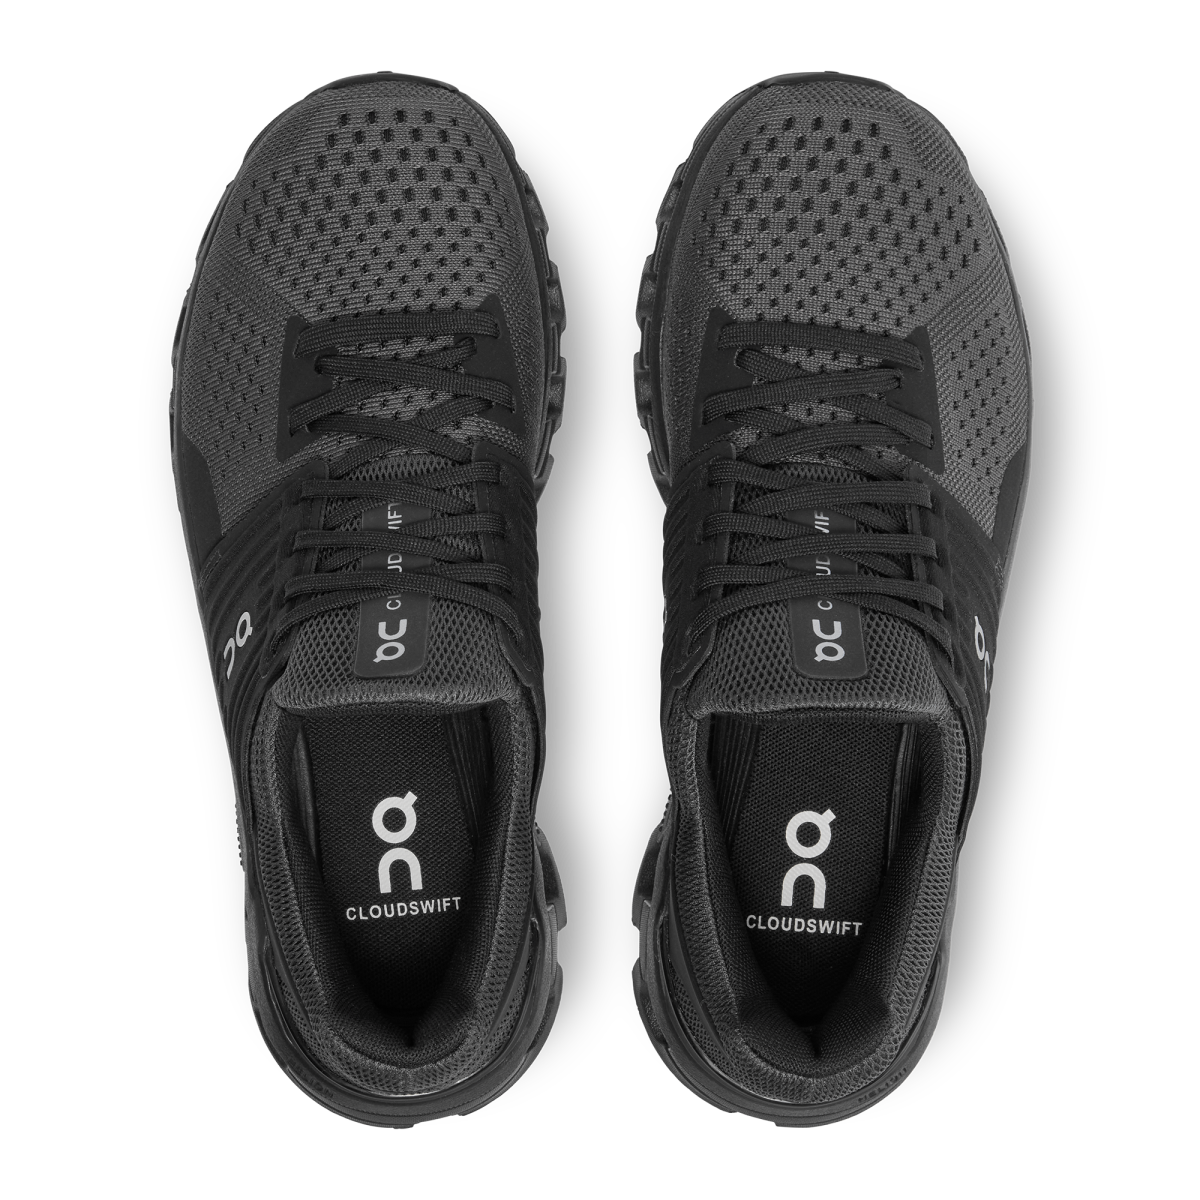 Women's Cloudswift | All Black | On United States